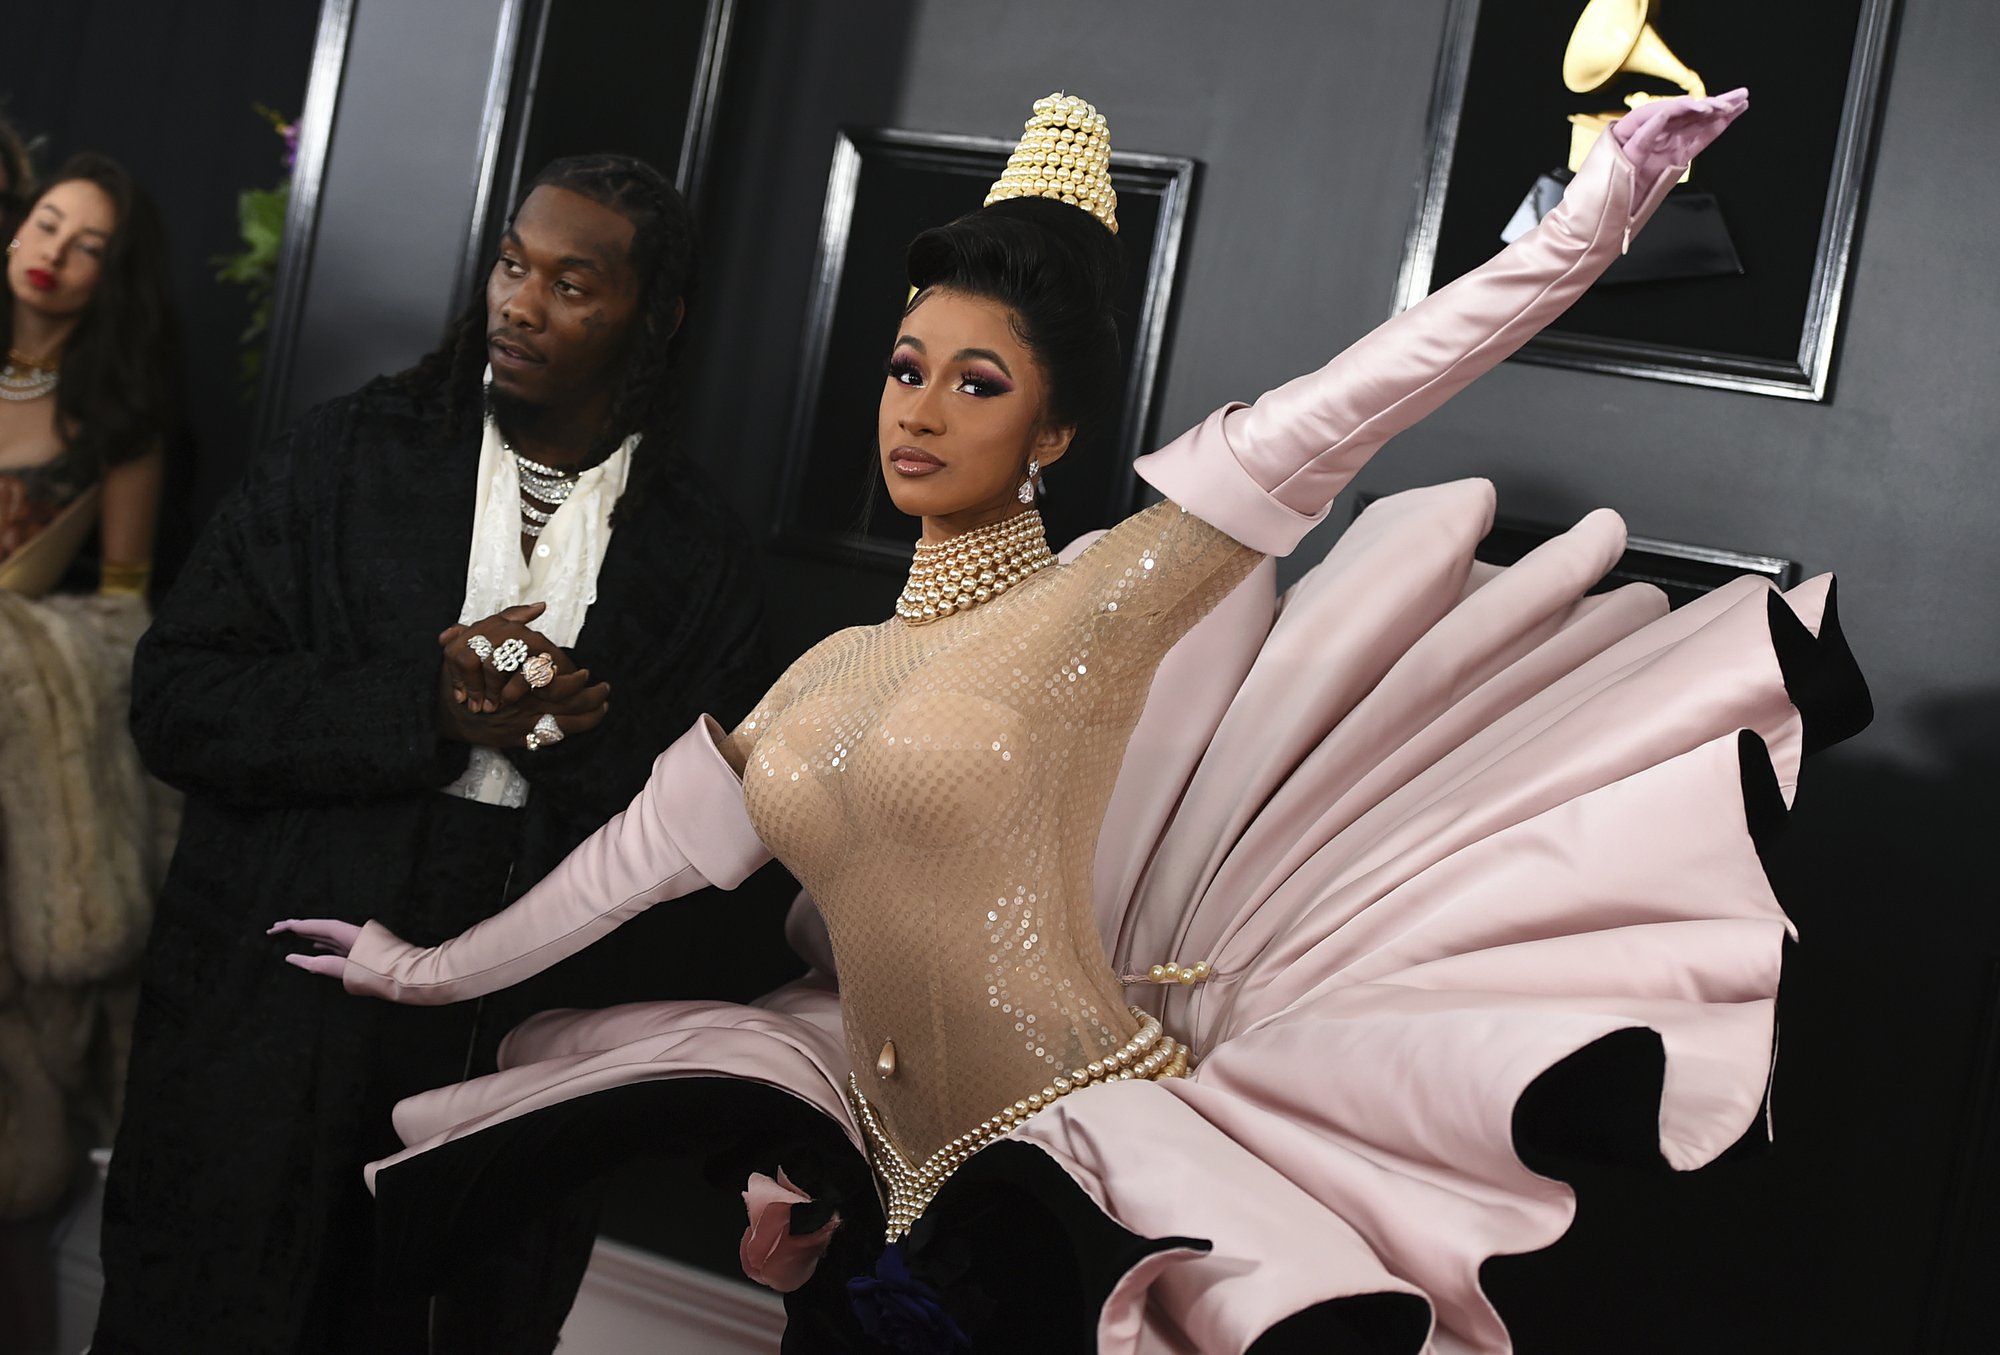 Offset, left, and Cardi B arrive at the 61st annual Grammy Awards at the Staples Center on Sunday, Feb. 10, 2019, in Los Angeles. Photo: AP